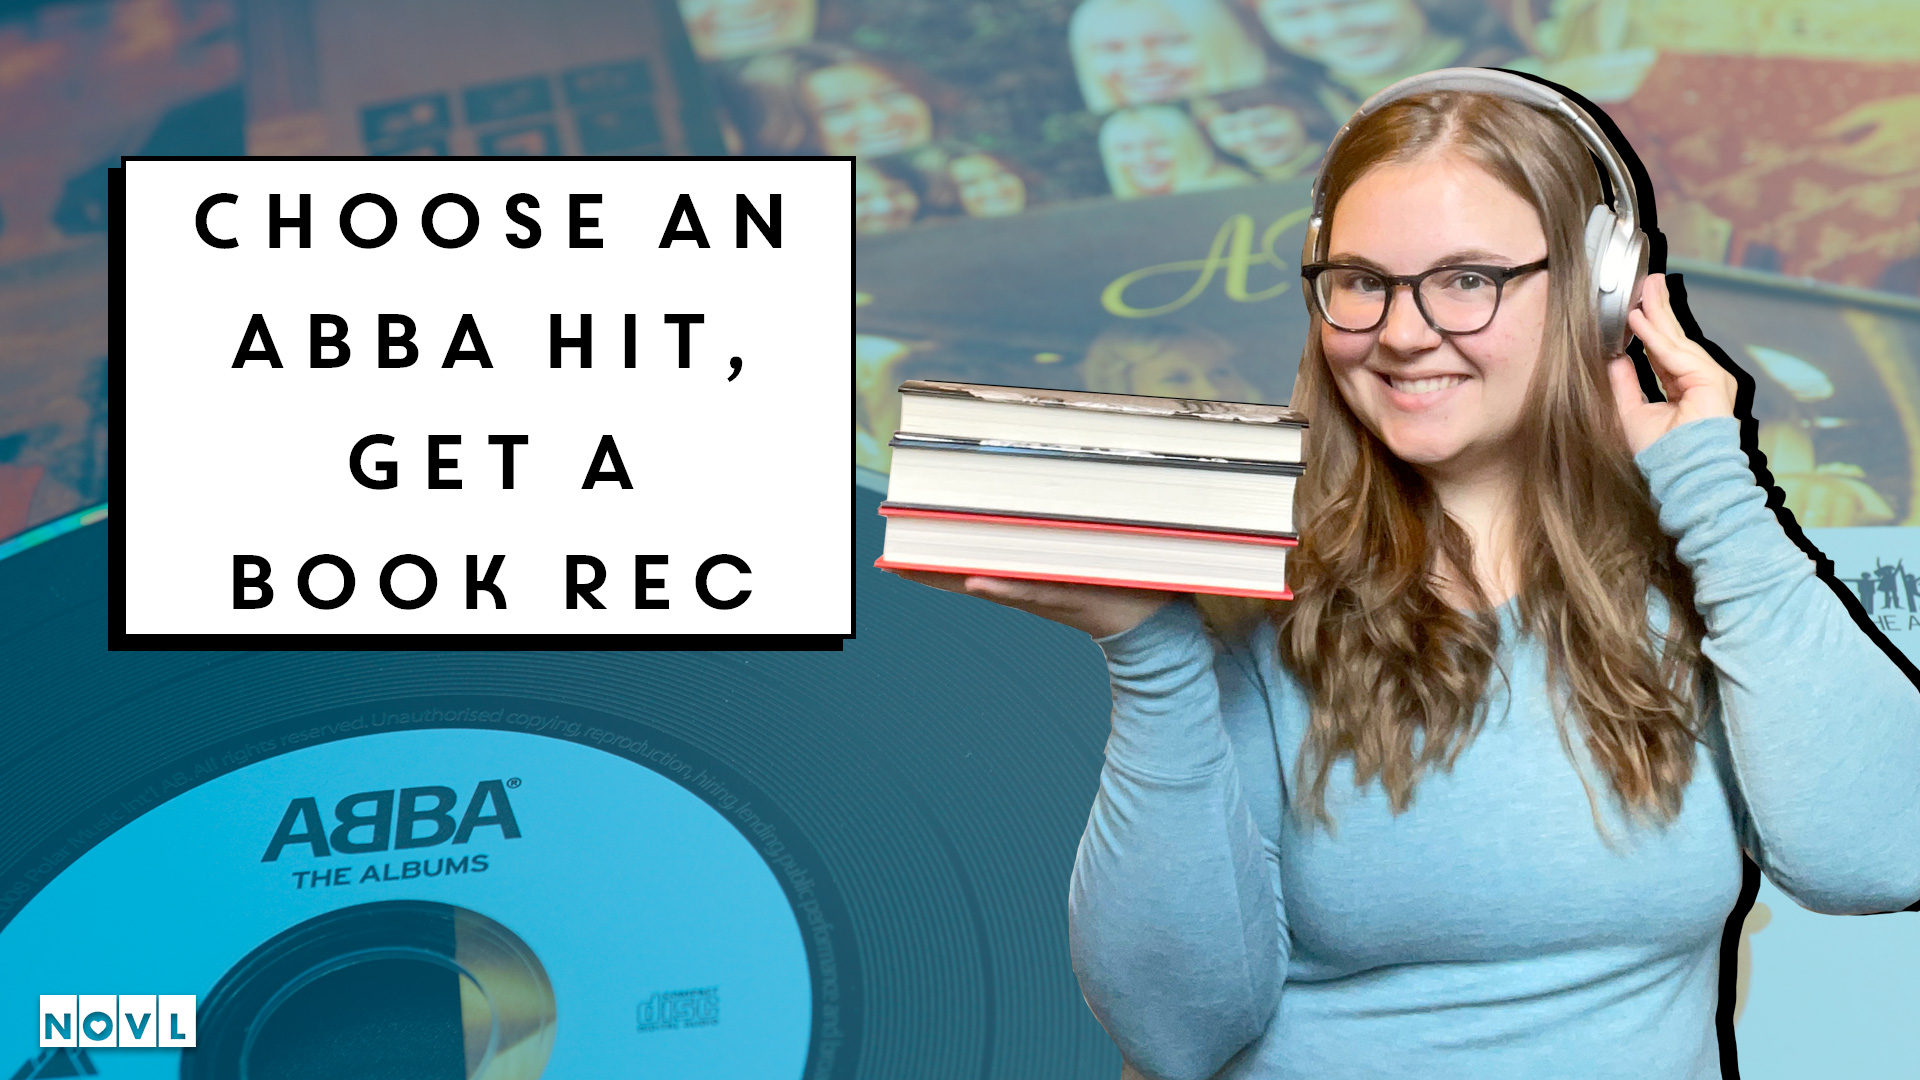 The NOVL Blog, Featured Image for Article: Choose an ABBA Hit, Get a Book Rec